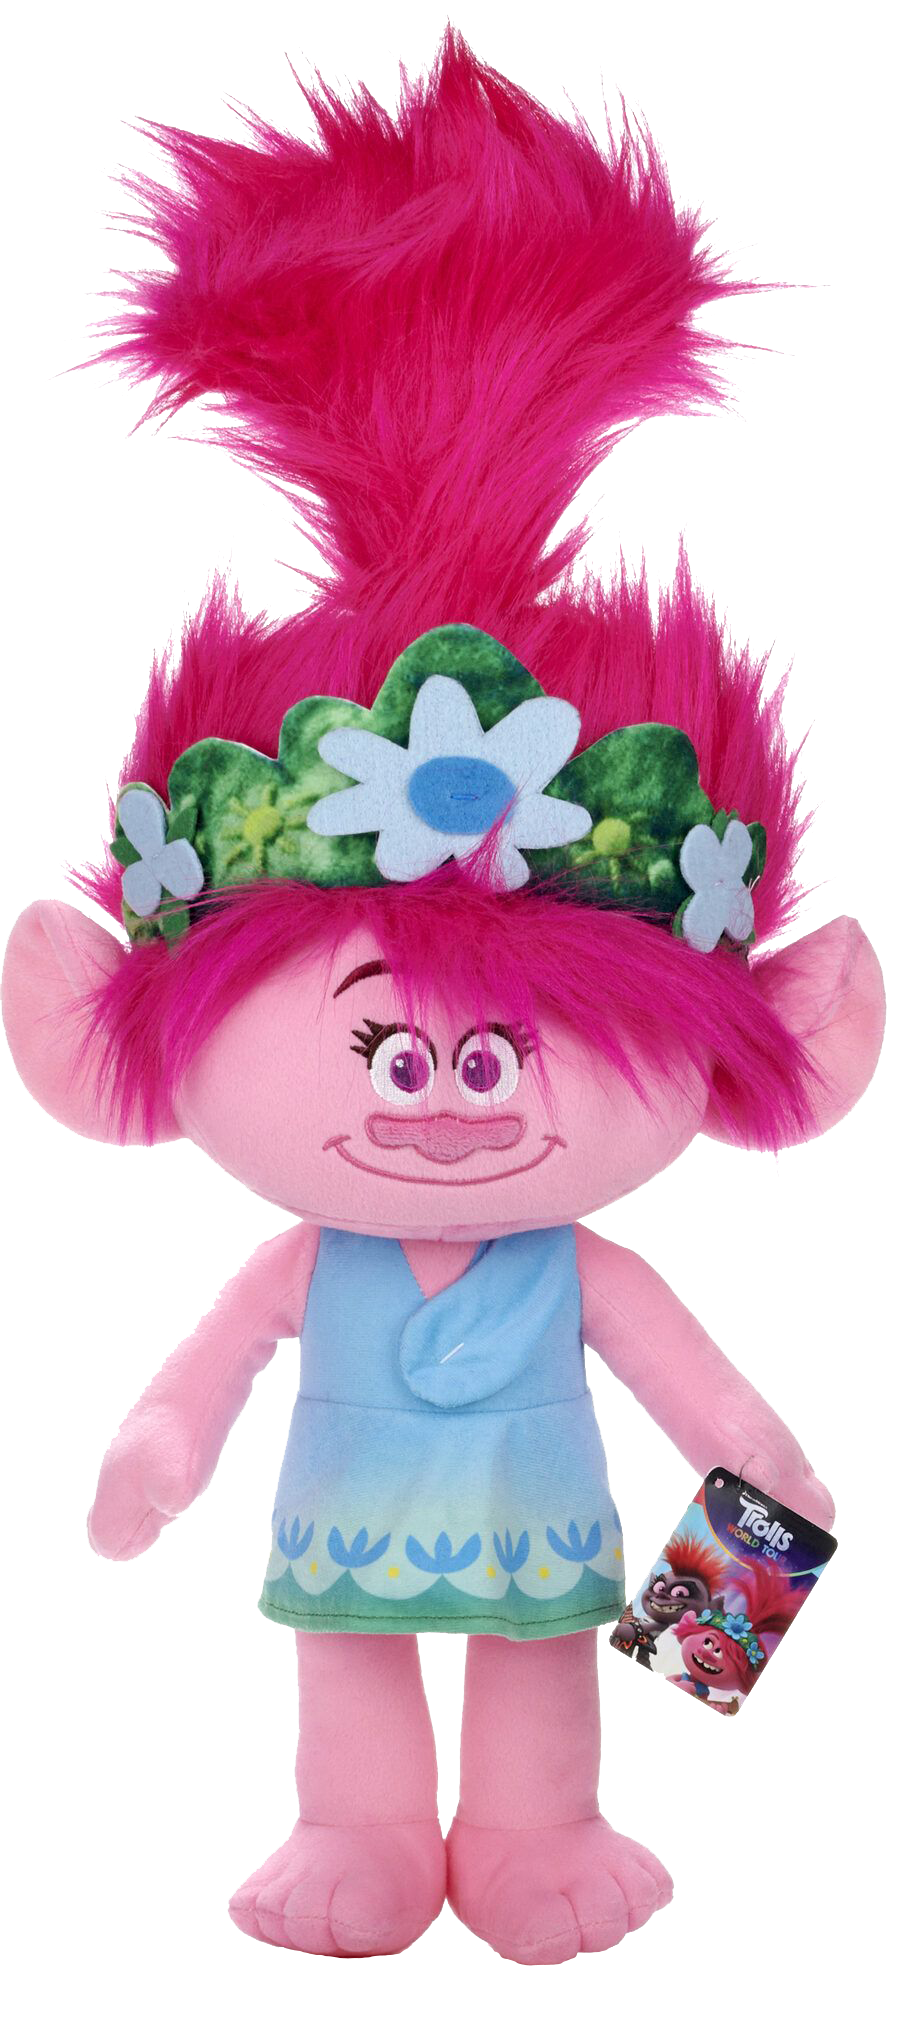 From the smash-hit animated comedy and musical adventure, Princess Poppy is back in Trolls 2 World Tour. Poppy, the happiest Troll ever born is beautifully recreated with her bright pink hair and her infectious smile. Create your own musical adventure with Poppy or simply snuggle down with this soft and cuddly plush toy. 